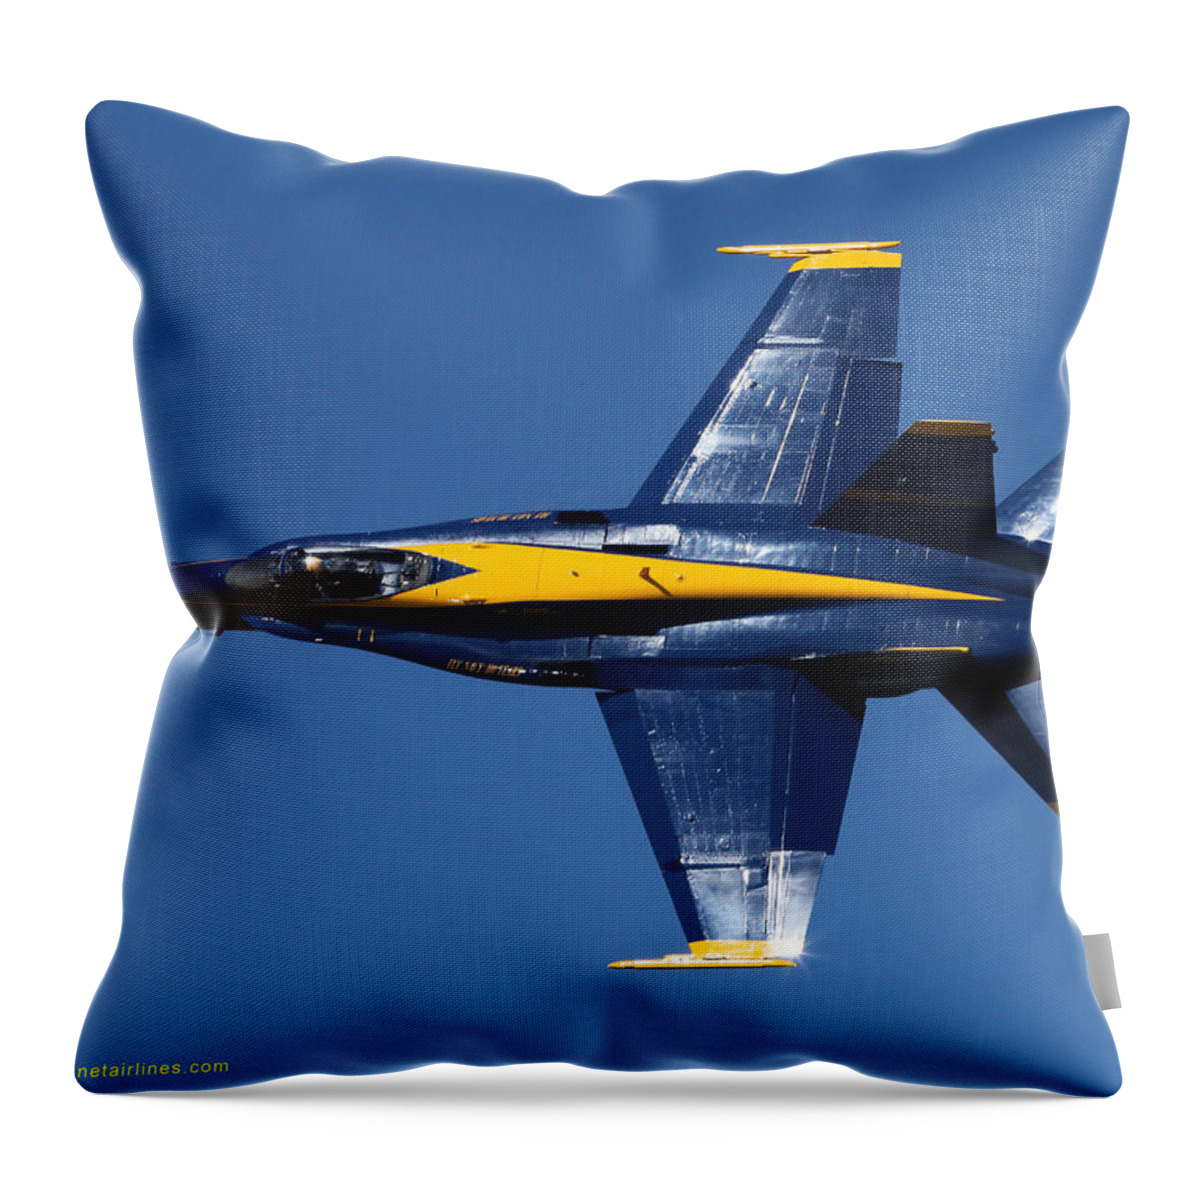 Blue Angels Throw Pillow featuring the photograph Blue Angels Solo Knife-edge by Custom Aviation Art